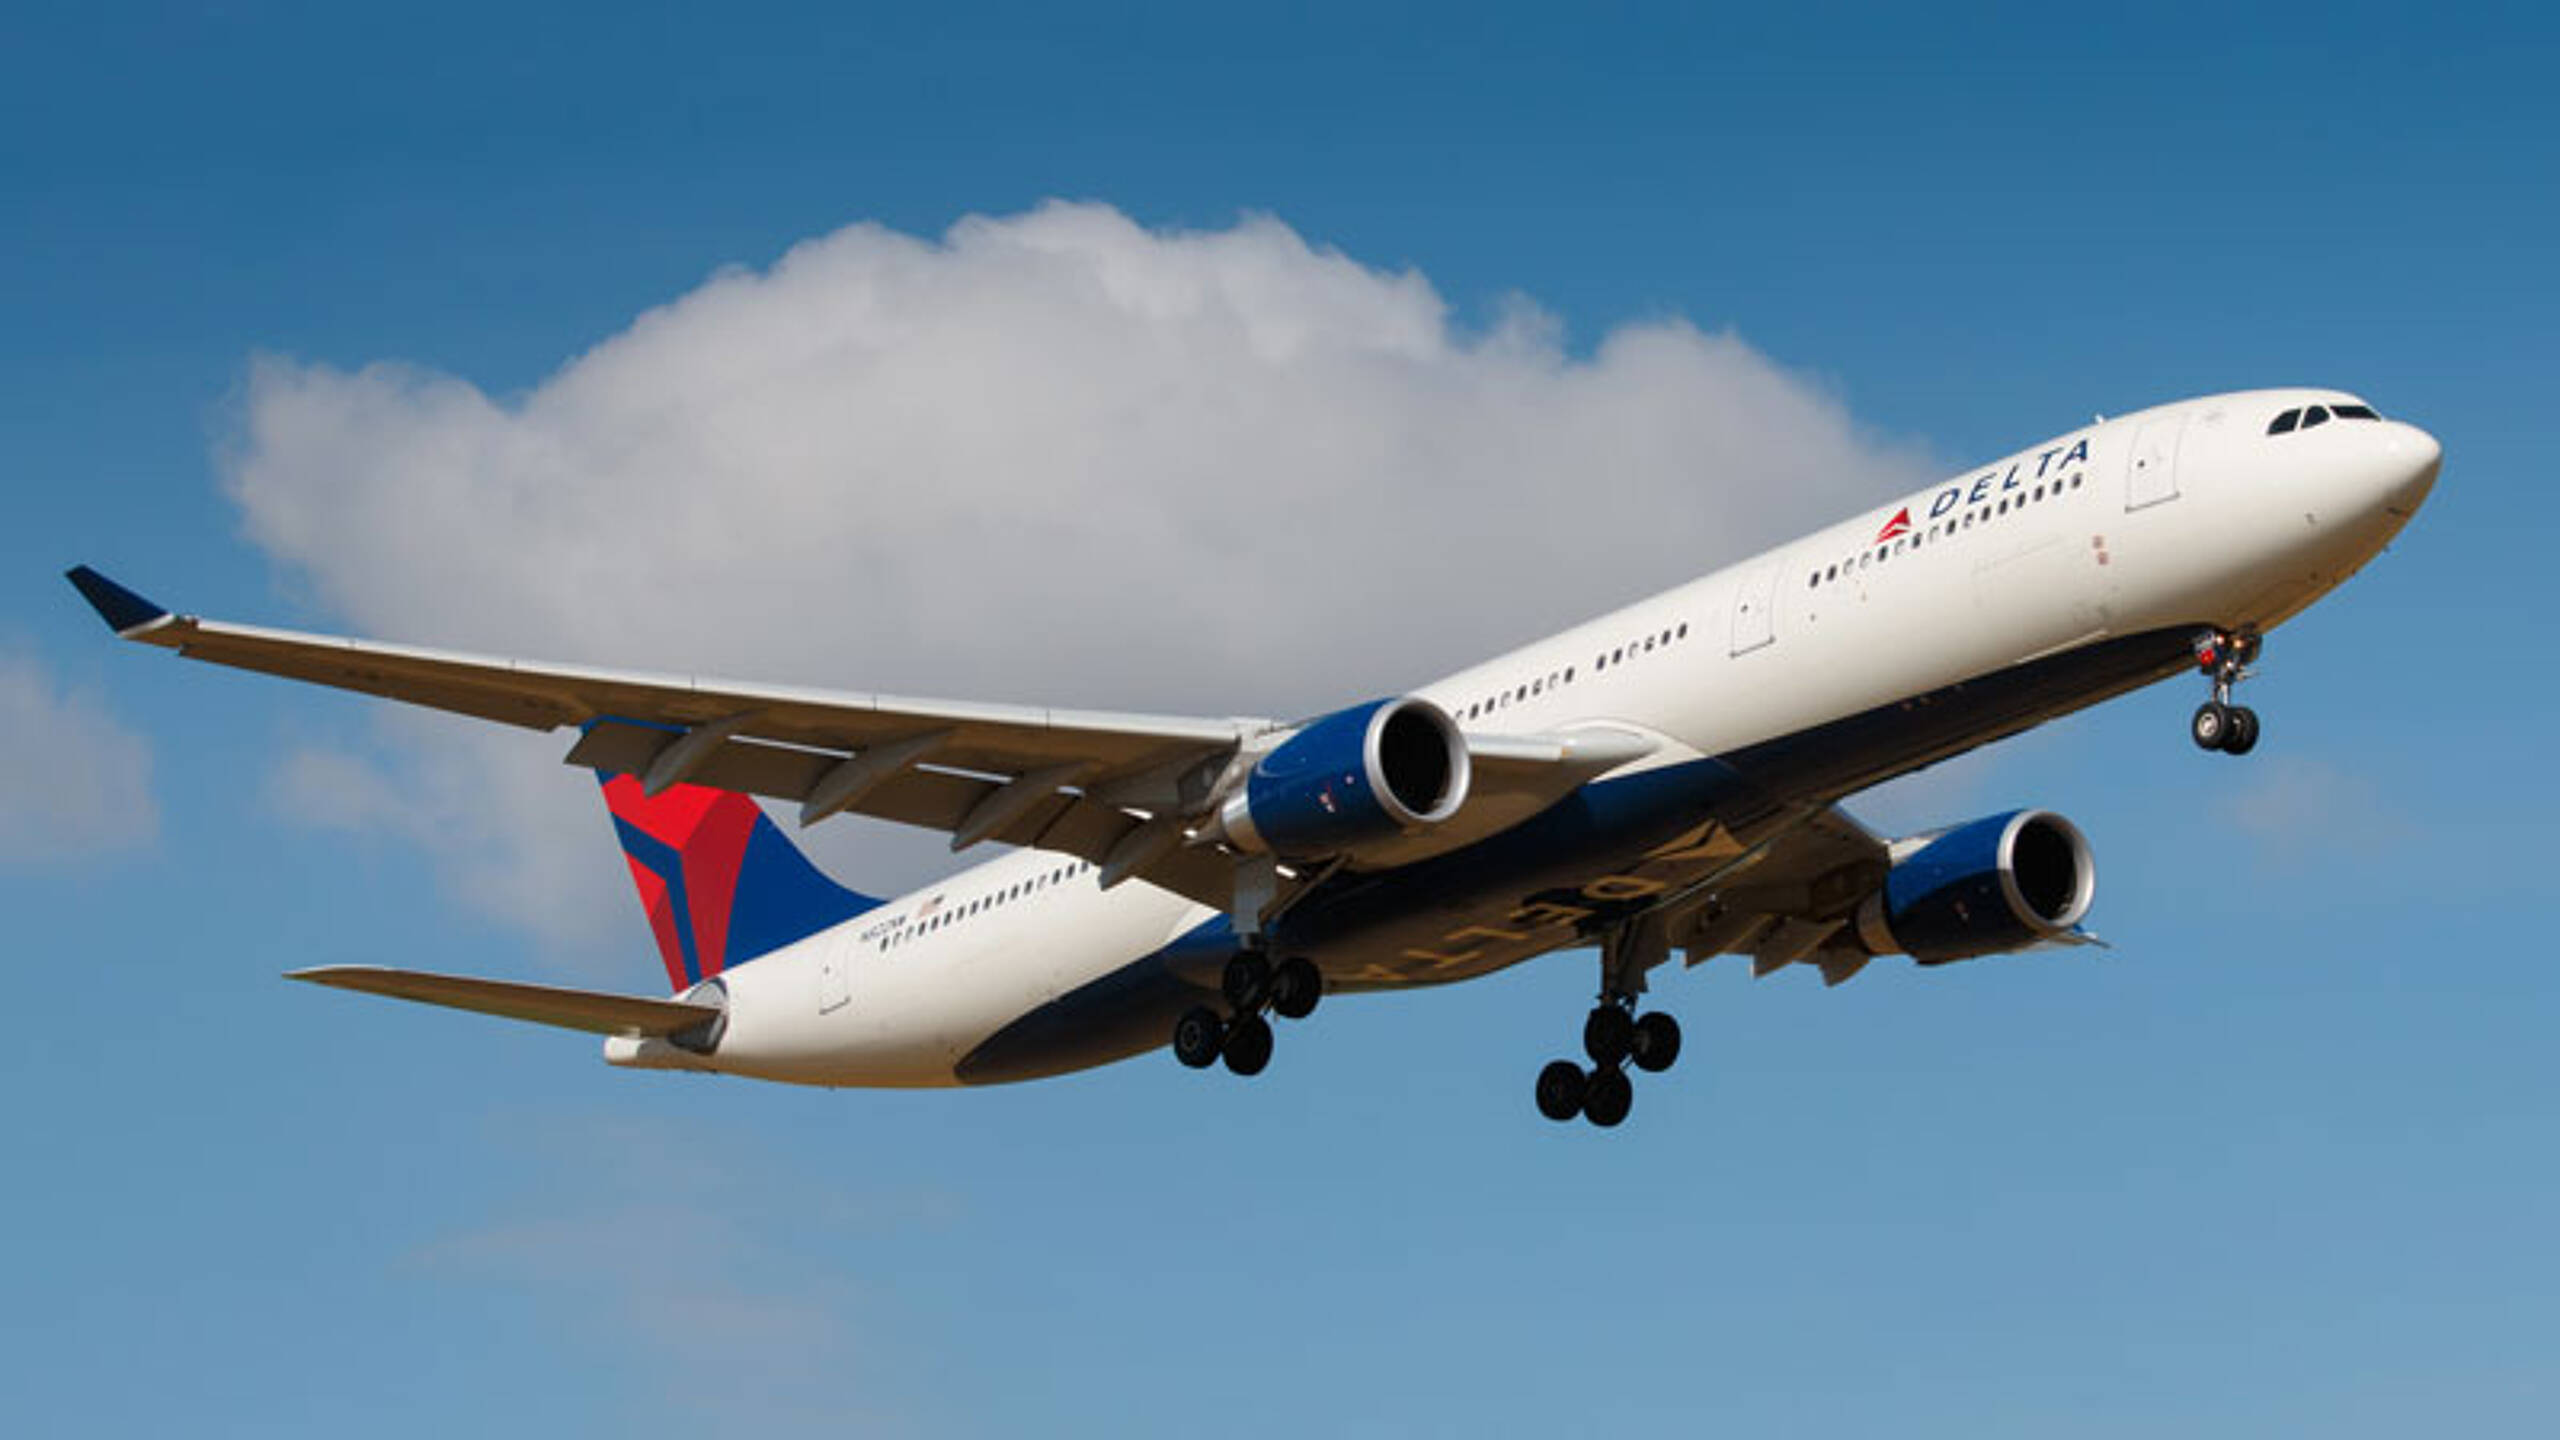 Delta Air Lines faces legal action over carbon neutrality claims